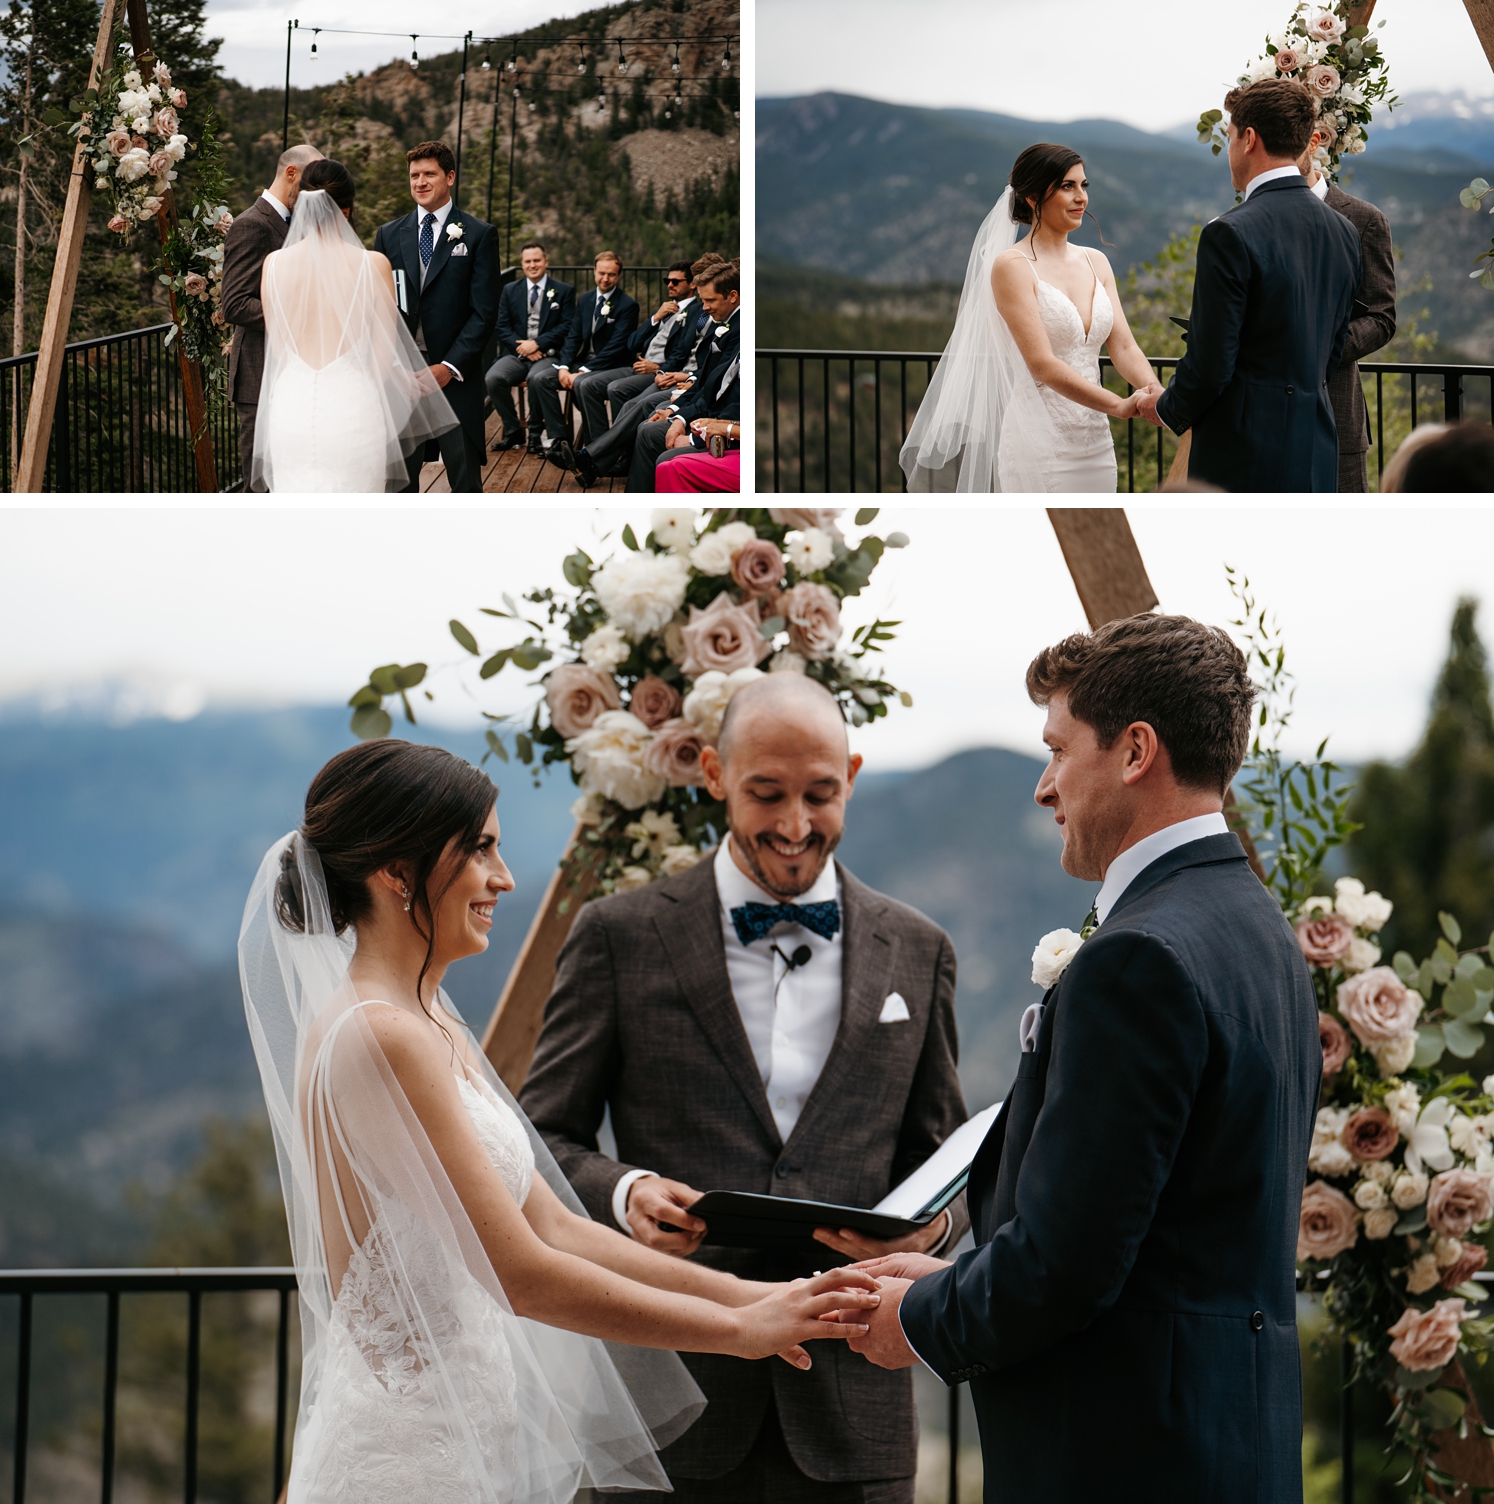 Groom looking at bride at wedding ceremony | bride looking at groom at wedding ceremony | Bride and groom with officiant at North Star Gatherings wedding | McArthur Weddings and Events